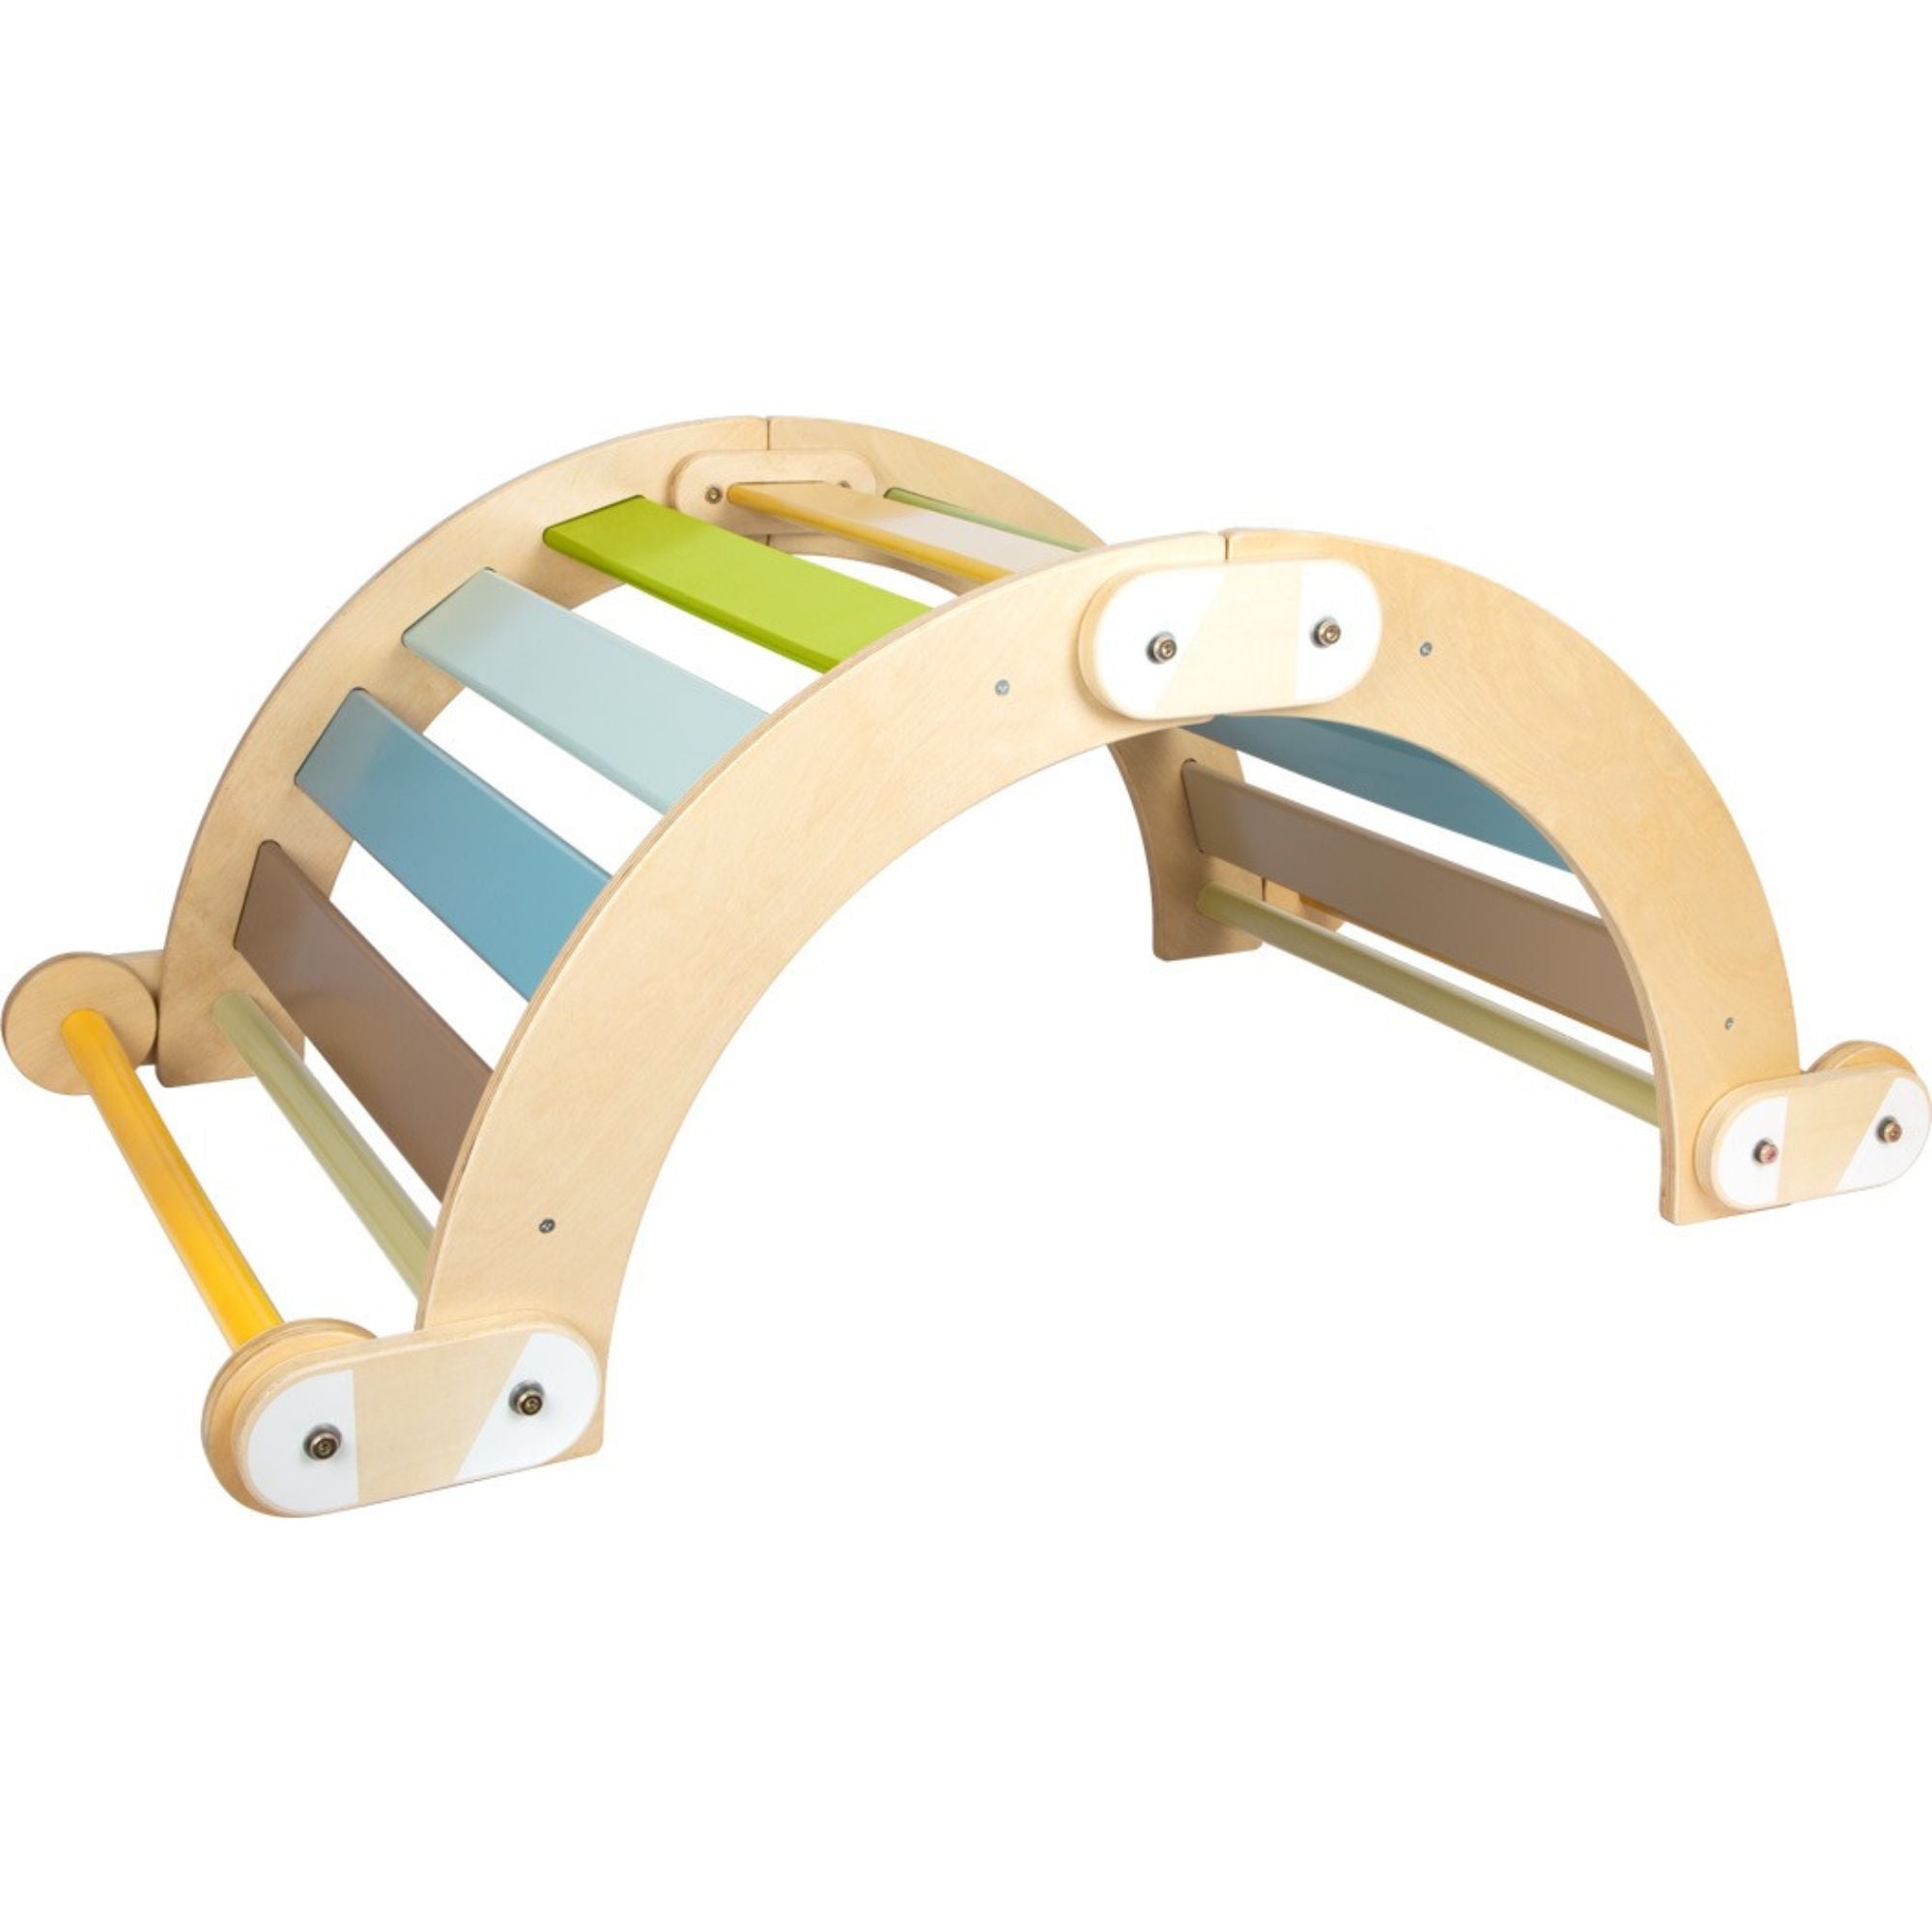 Climbing Seesaw Adventure, Climbing, seesawing, and sliding! This wooden climbing seesaw is a multifunctional all-rounder with all kinds of possibilities for creative play and promoting the development of motor skills and movement abilities. The shape and form of the toy fits its respective function: whether as an arch, tunnel, slide, bridge, or turned upside-down as a seesaw or balance board - the play variations are limitless! And this is practical: when playtime is over, the triangle can be stored in a s